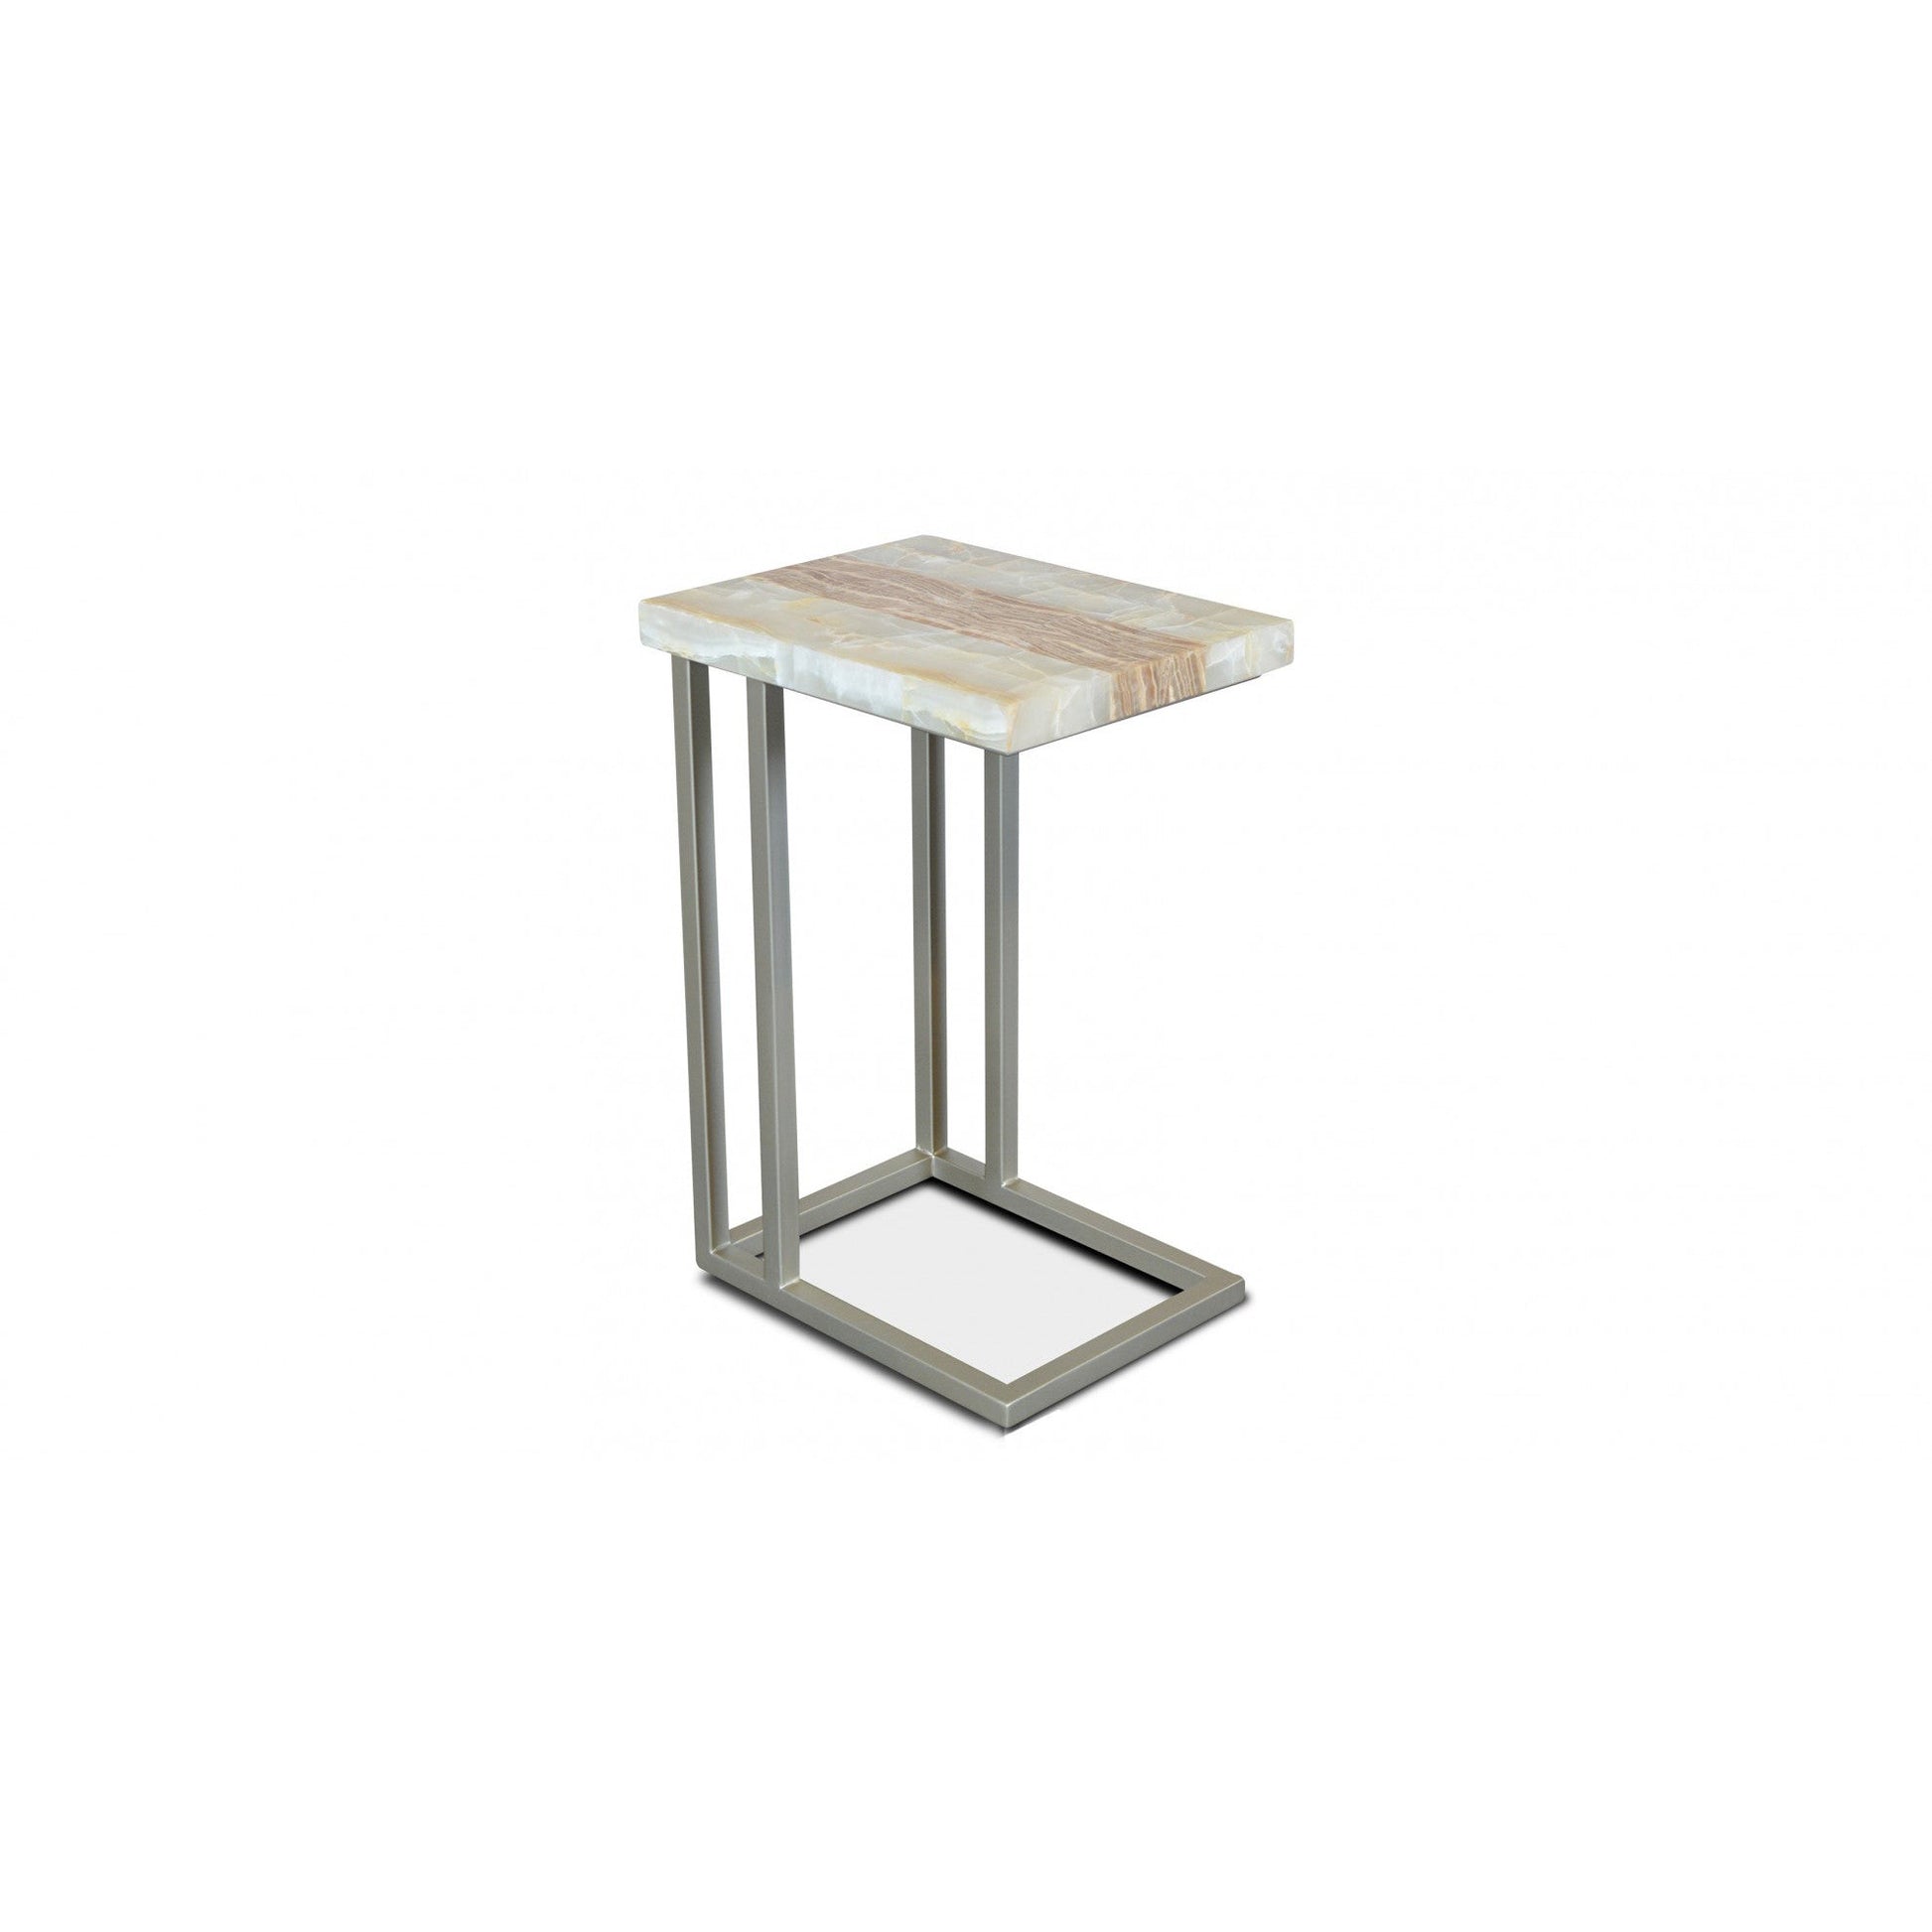 The Spectrum Onyx Top Side Table is a classic piece of furniture crafted from natural Onyx and forged iron, combining durability with timeless elegance. Its solid base ensures stability, while the polished Onyx top adds a luxurious touch to any living space.